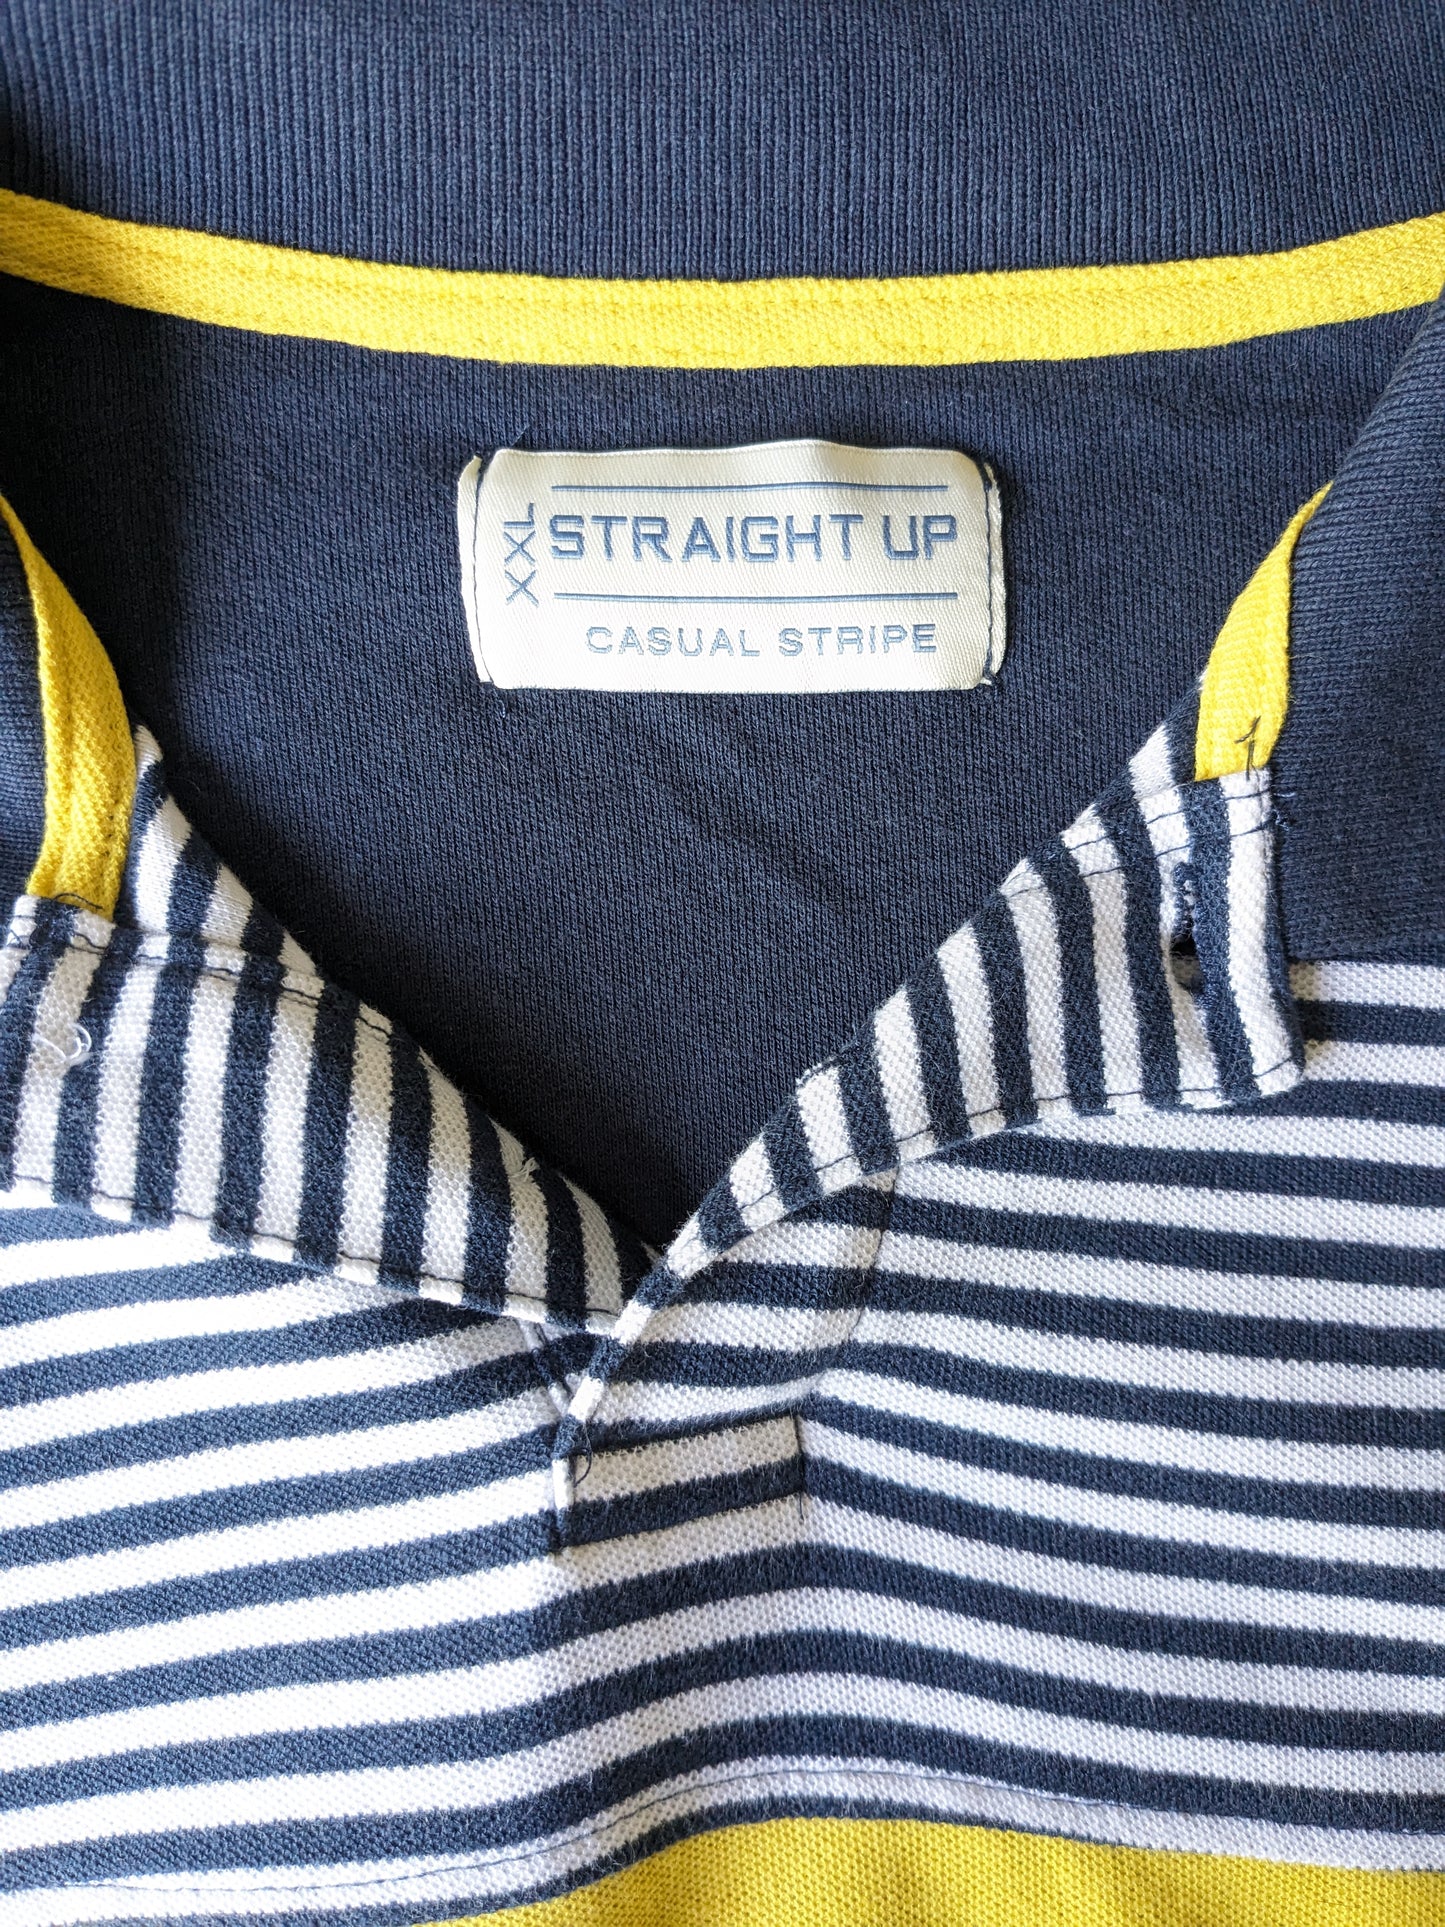 Straight Up Polo. Blue yellow white colored. Size 2XL / XXL.